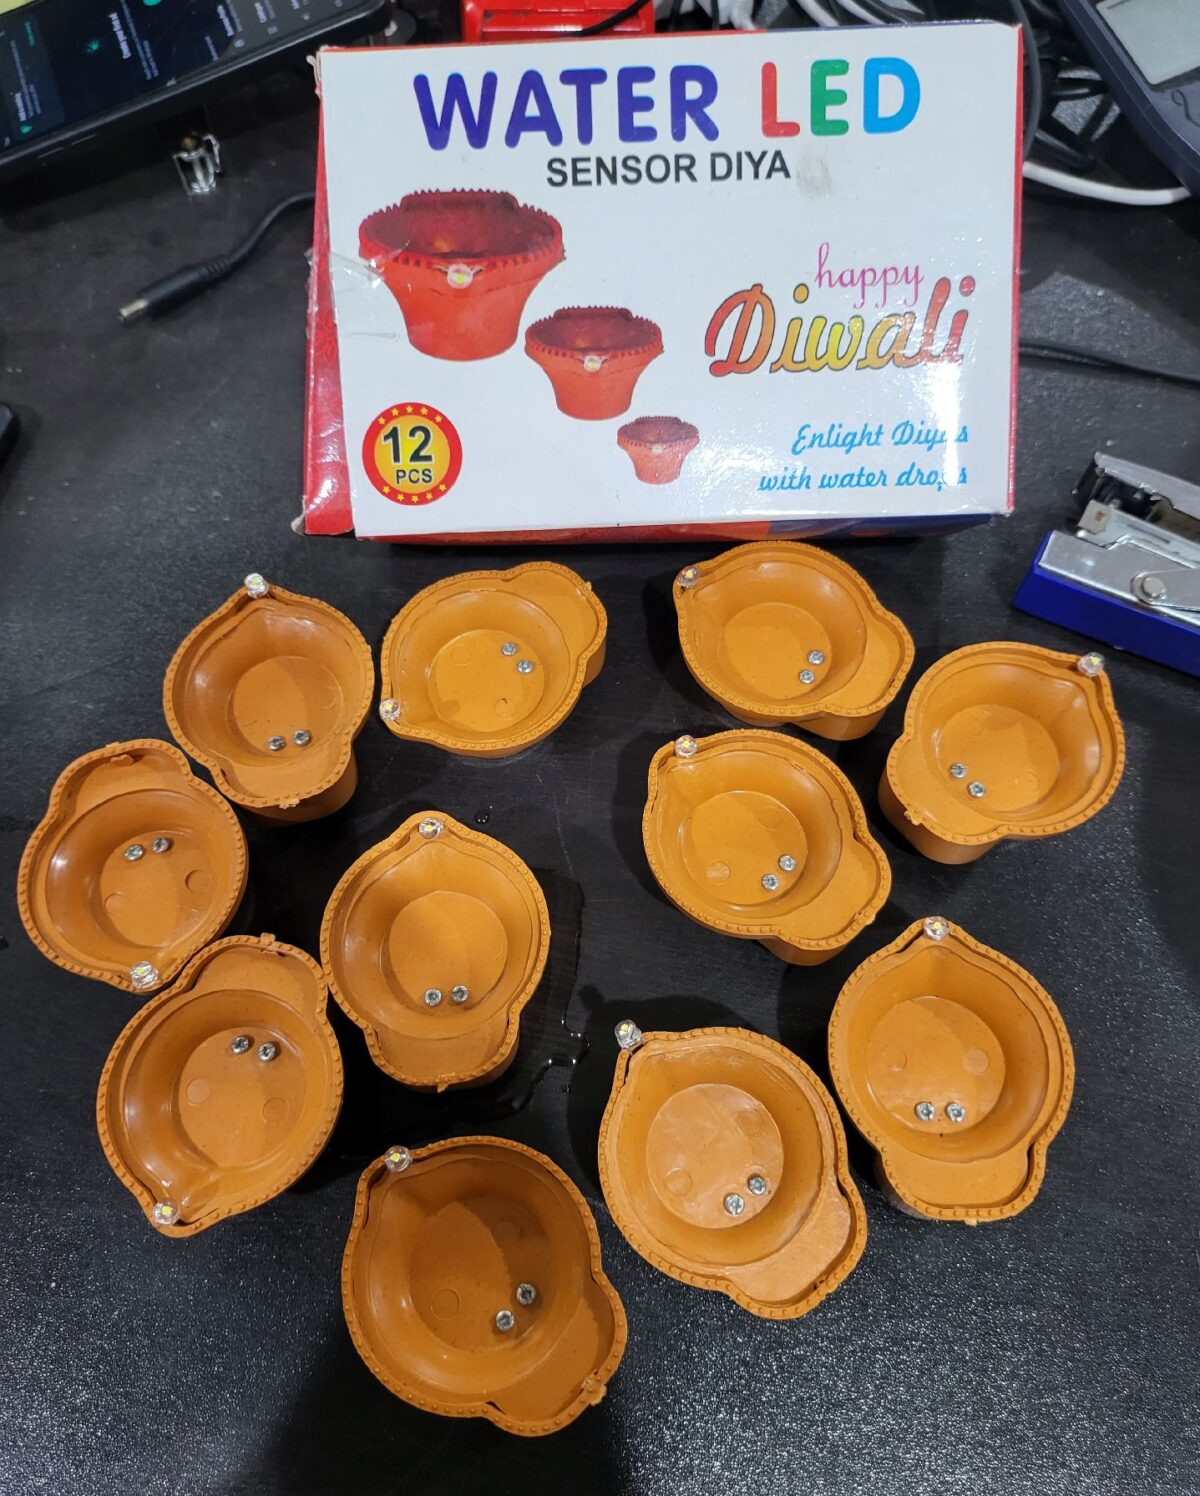 The "Water LED SENSOR DIYA (12PC BOX)" is a set of 12 LED diyas designed for decorative and celebratory purposes. These LED diyas are intended to replicate the traditional oil lamps, or diyas, commonly used in Indian festivals and cultural events. What makes them unique is the water sensor feature, which means that they illuminate when they come into contact with water. This feature offers a safe and convenient way to enjoy the warm and inviting glow of diyas without the use of an open flame. These LED diyas come in a box containing 12 units and are commonly used to add a festive and spiritual ambiance to various occasions, particularly during festivals like Diwali.